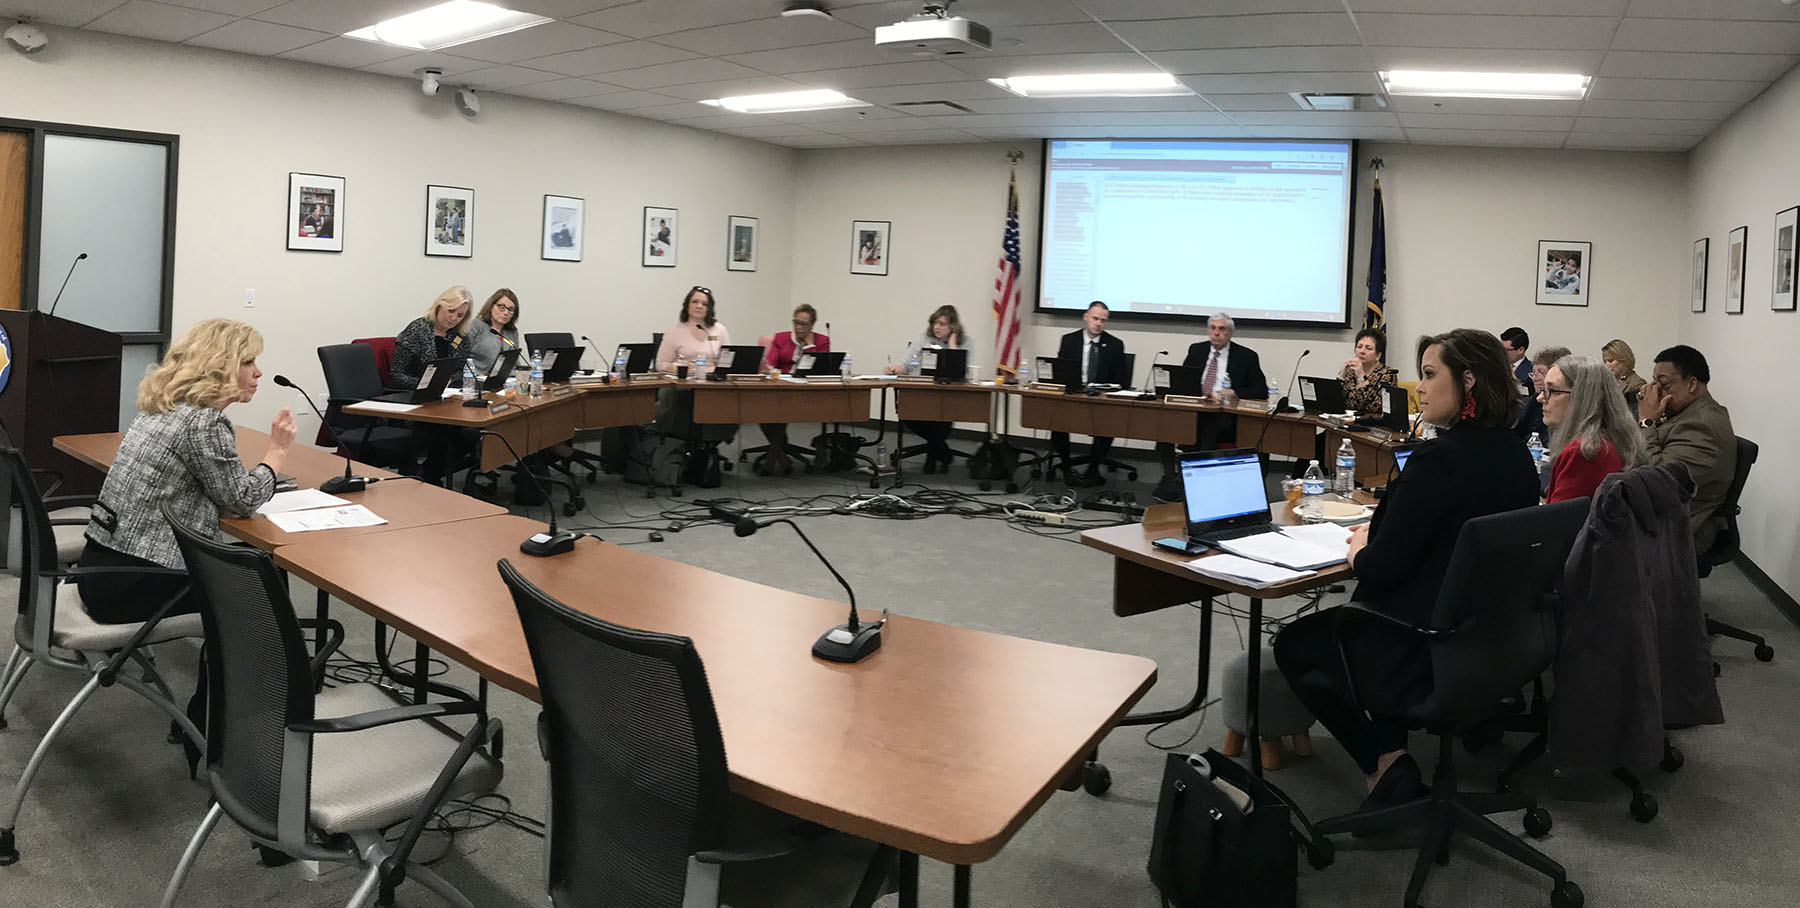 At its Feb. 4 regular meeting, members of the Kentucky Board of Education KBE expressed their concern about the state’s lack of progress in closing achievement gaps.